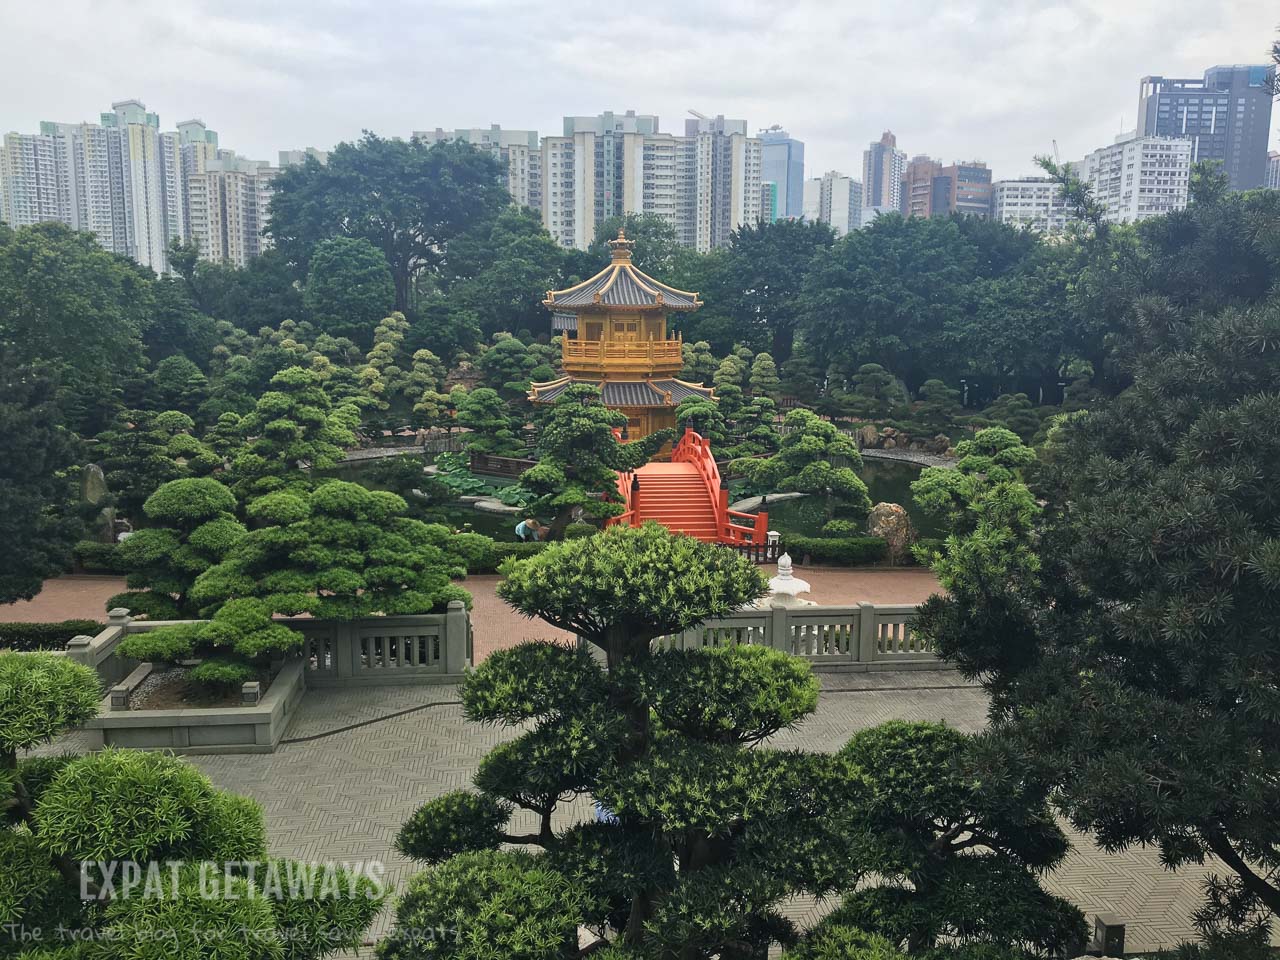 The Nan Lian Gardens and Chi Lin Nunnery are a tranquil oasis in bustling Hong Kong. 